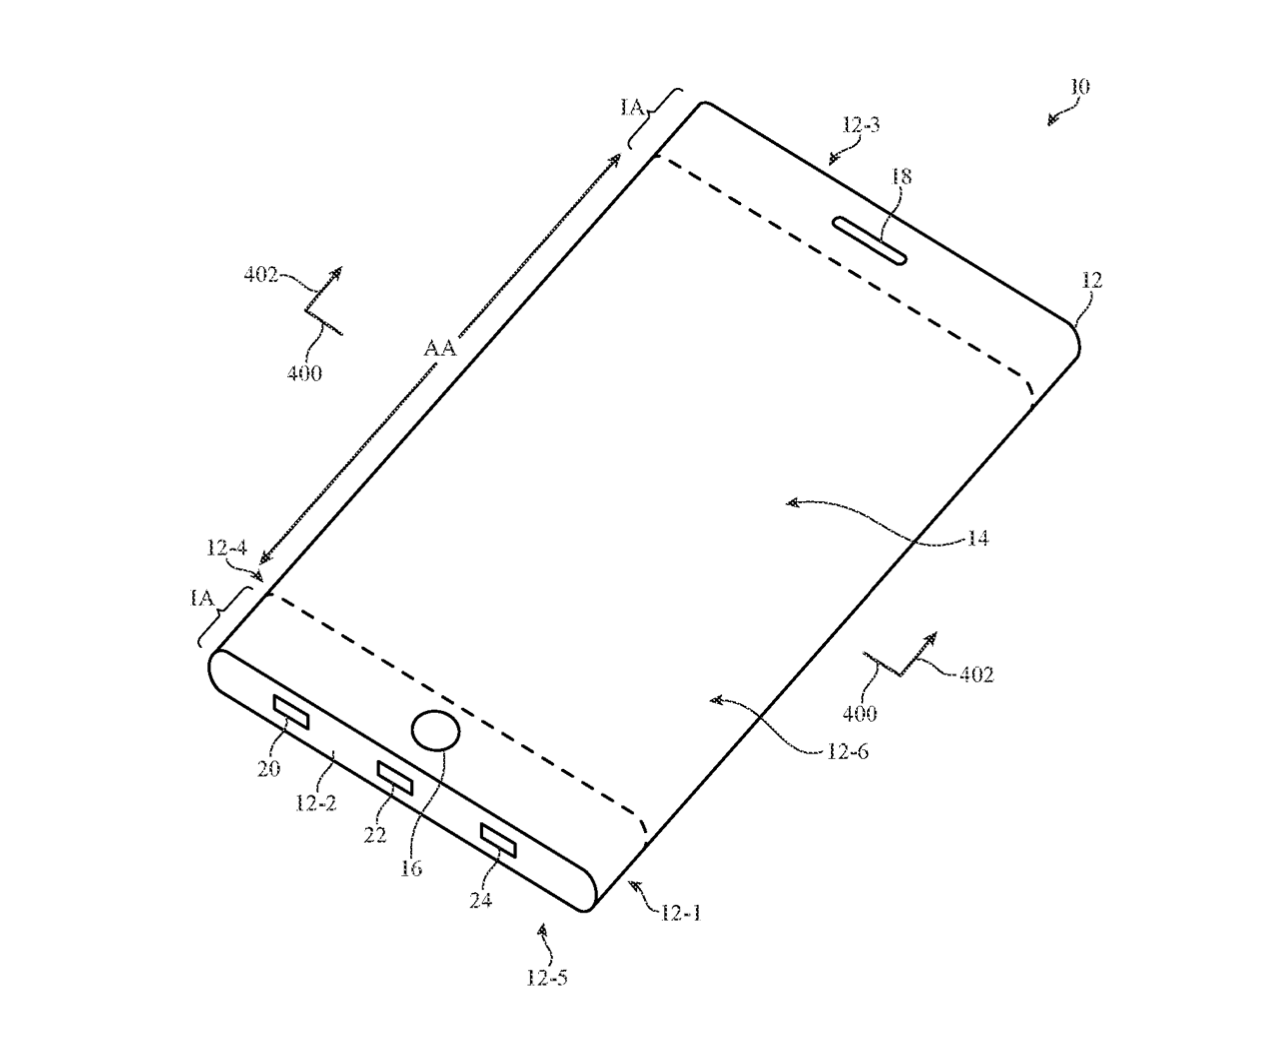 Apple mentioned wrapping a screen around the edges of a device to add more touch functionality. (Image: Apple)